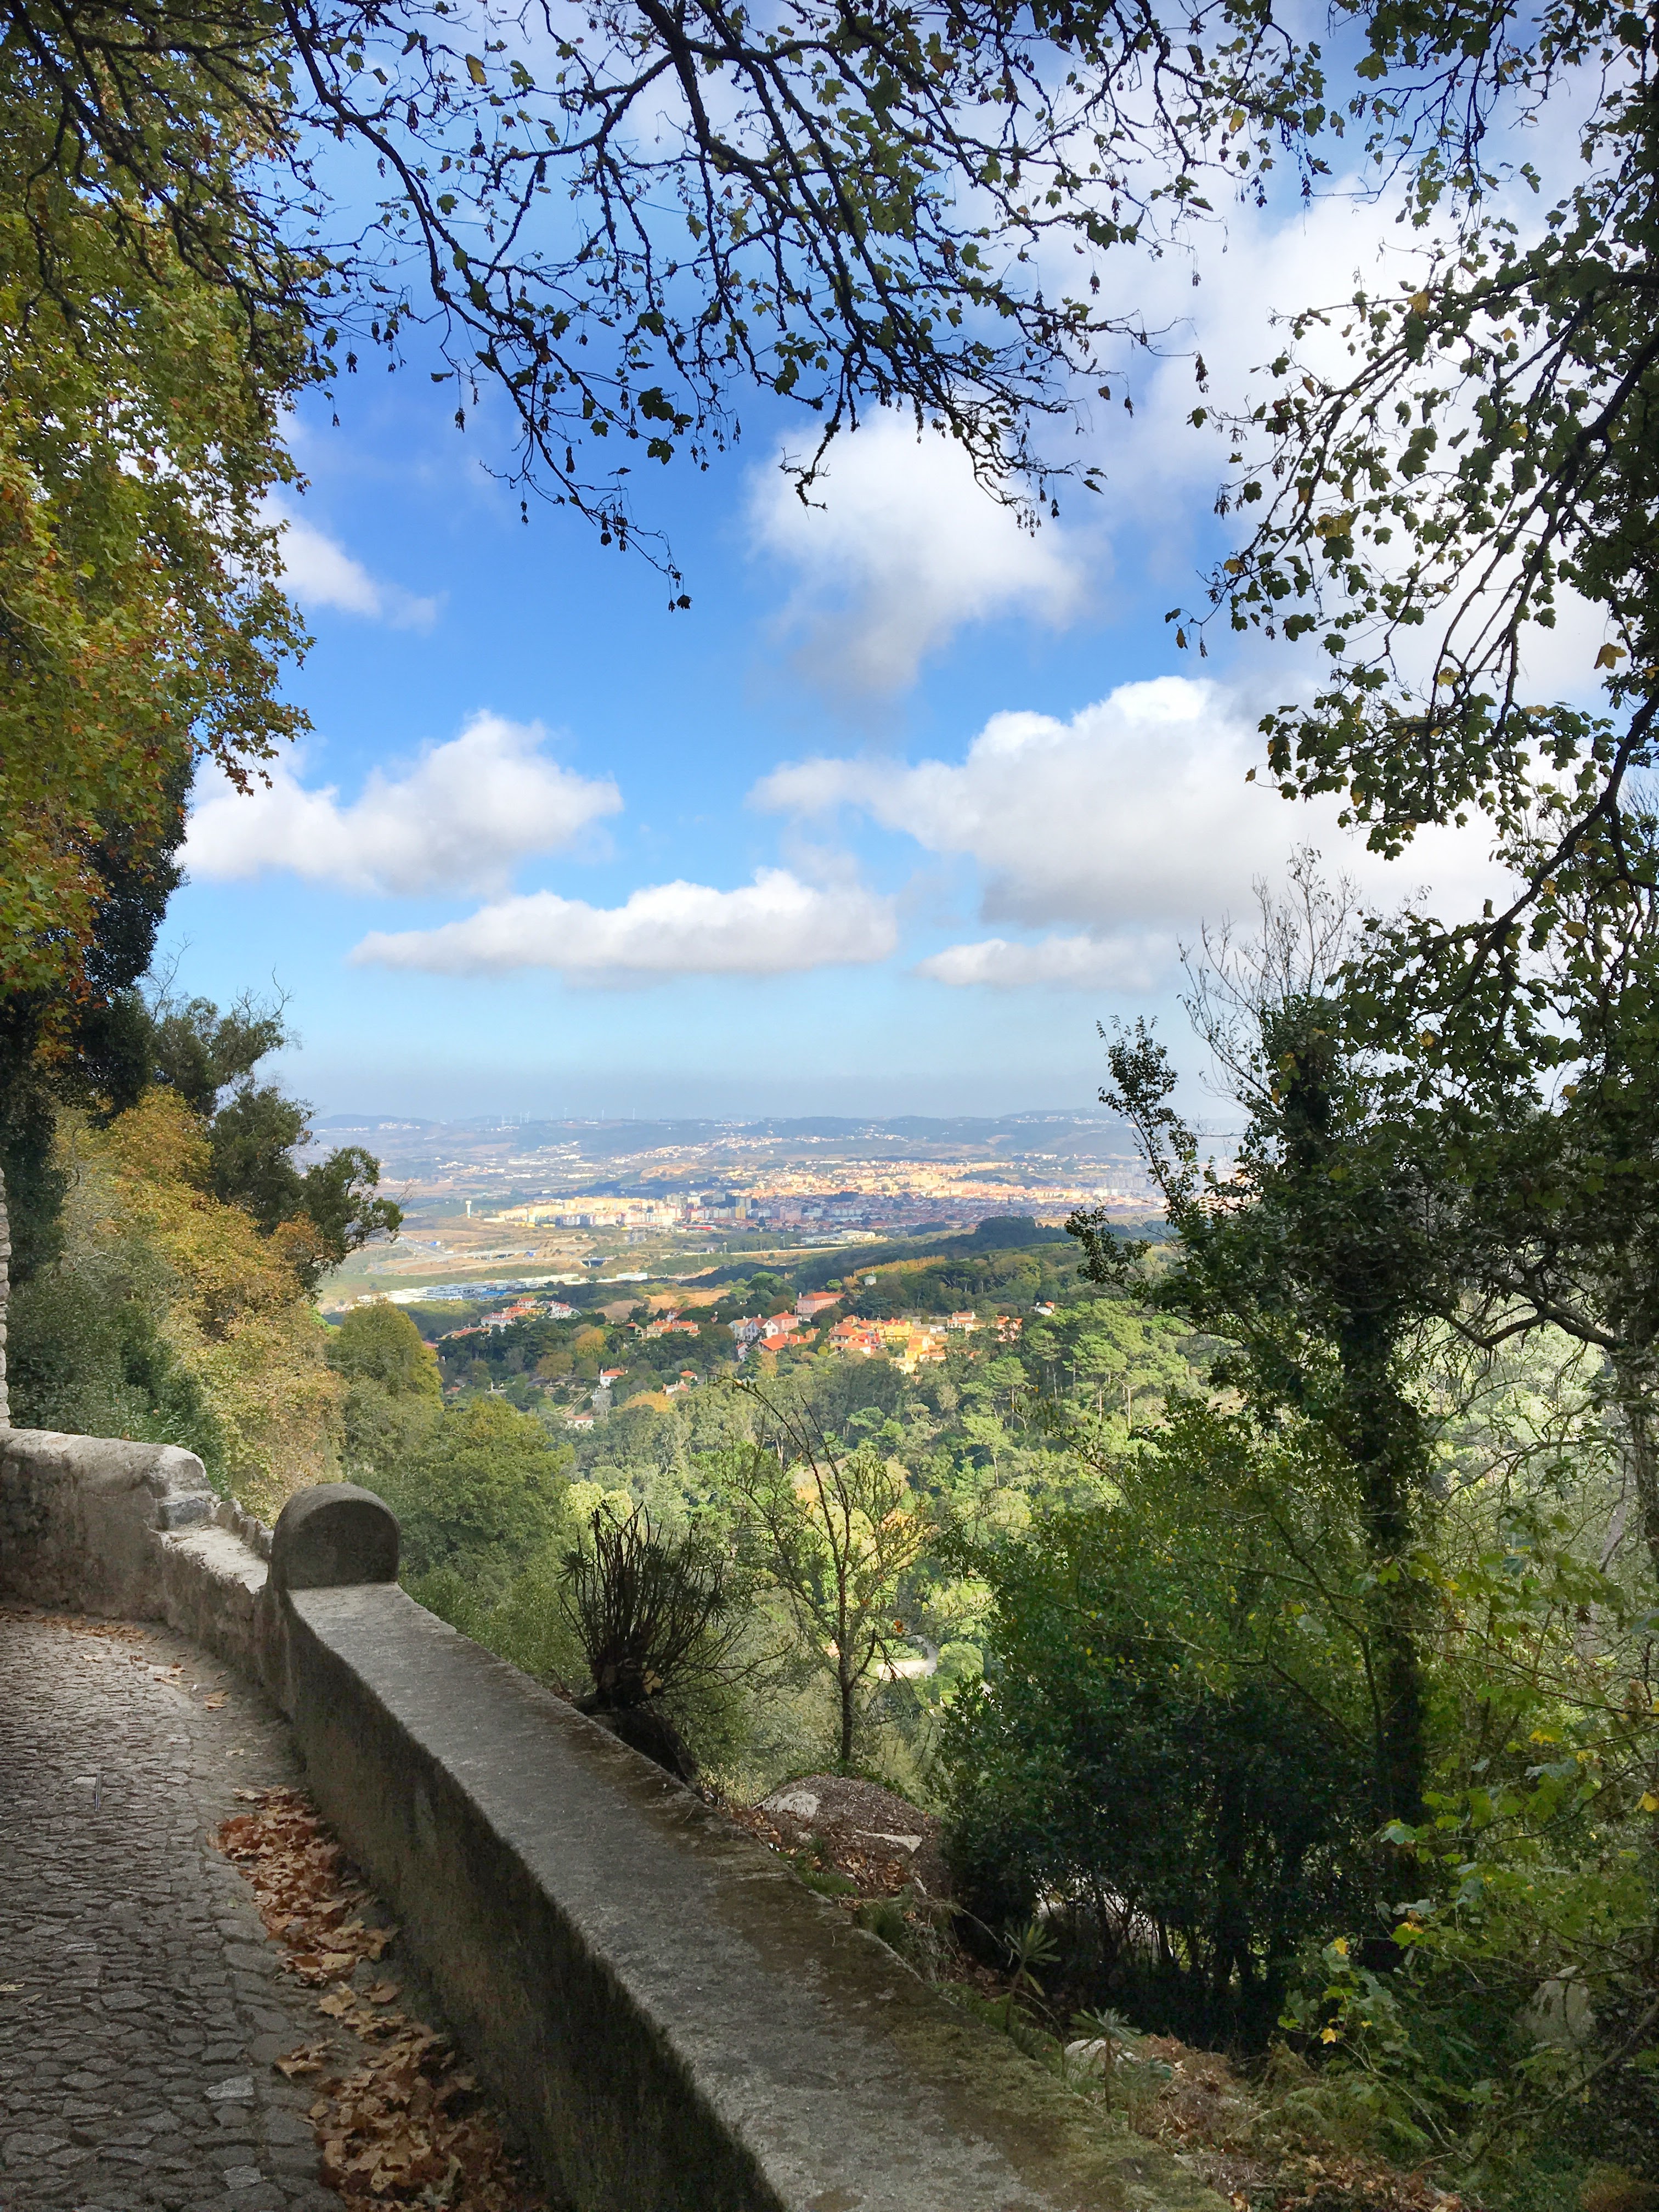 Panoramic view from the grounds of the Moorish Castle in Sintra, Portugal